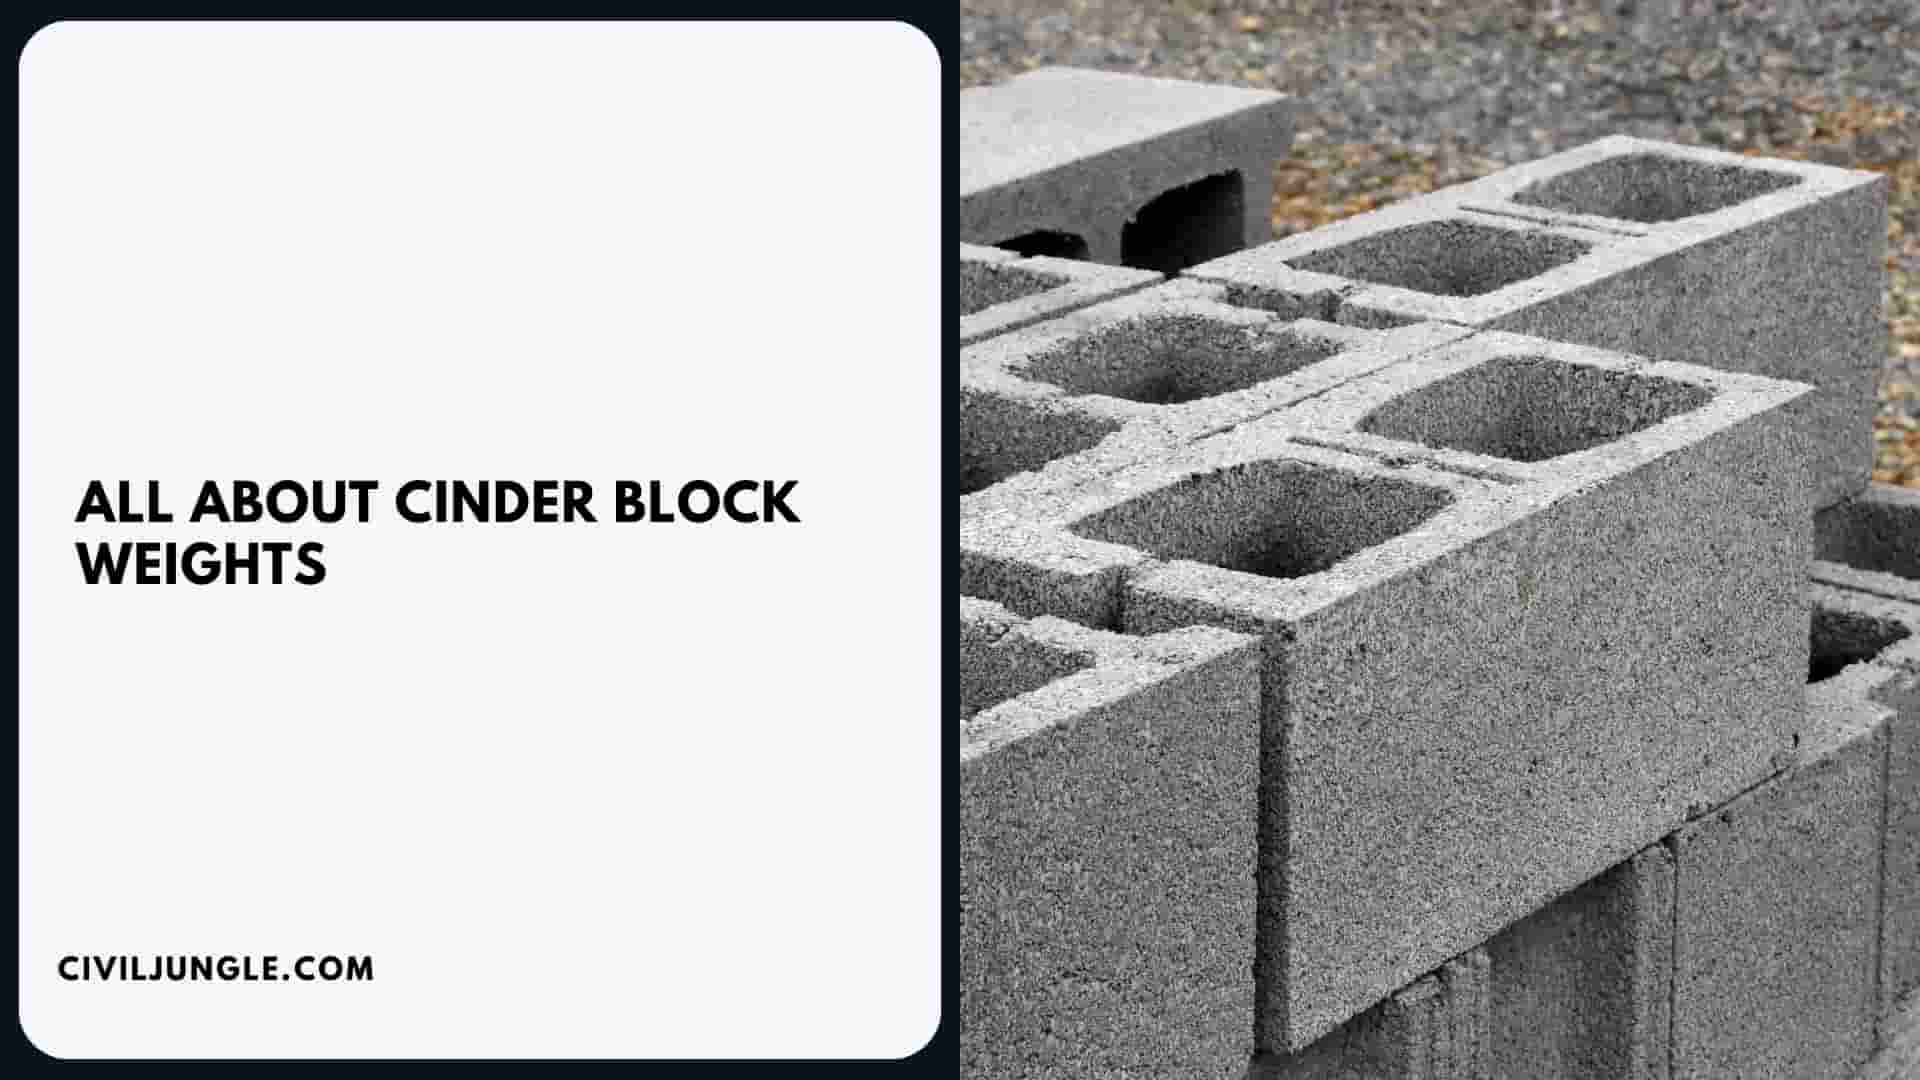 All About Cinder Block Weights